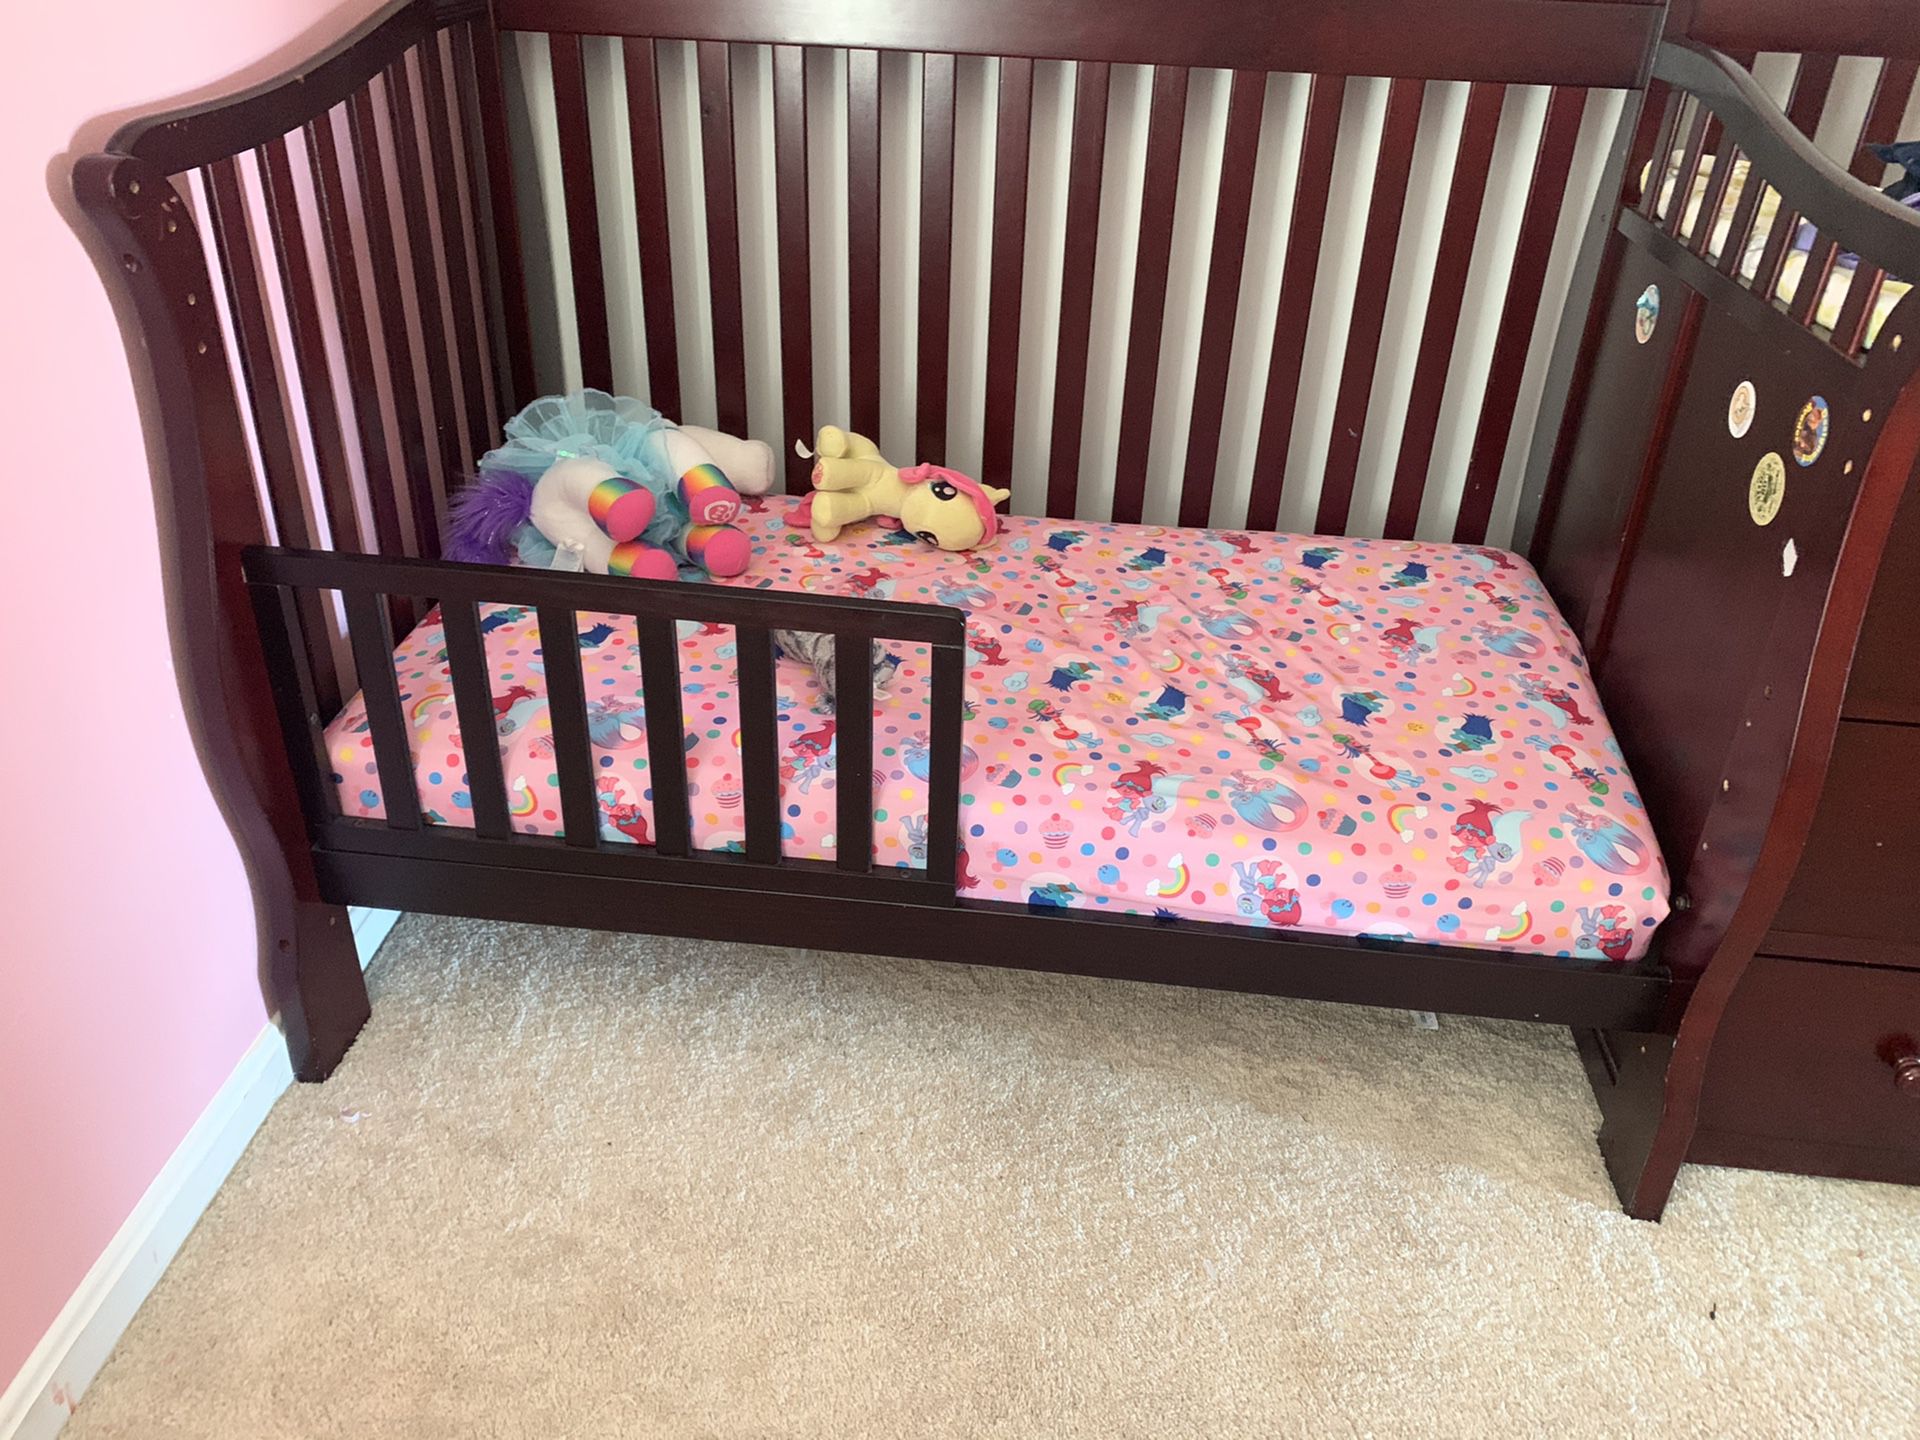 Baby’s crib with mattress for sale and guard rail